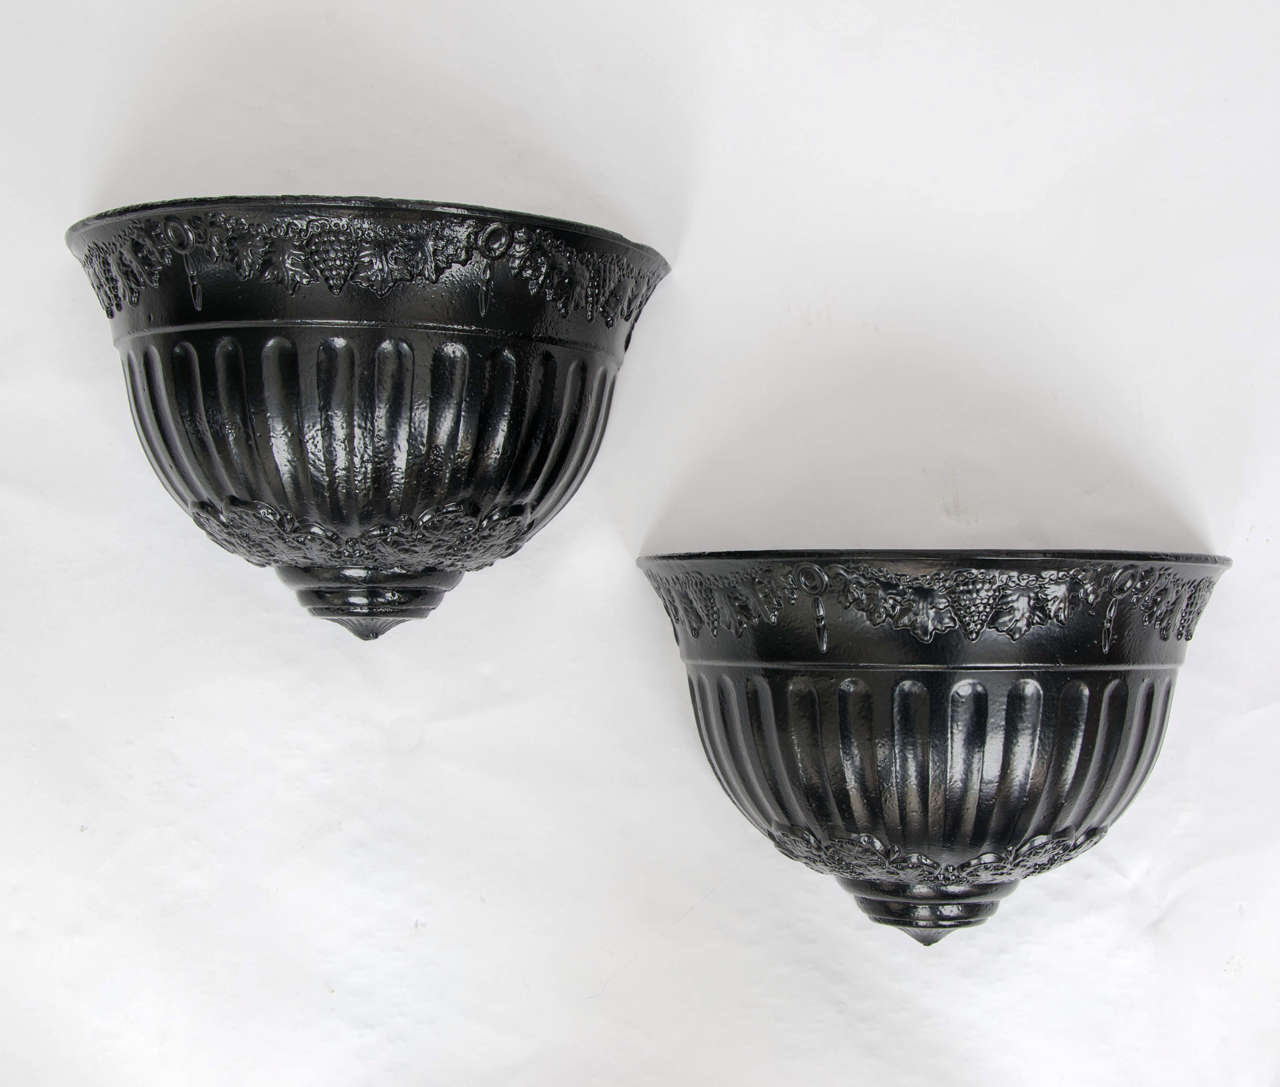 These are a very attractive and original pair of cast iron, wall hanging, English Planters from the Regency period of the early 19th century, circa 1820.

Each planter is semi-circular in profile with vertical fluting in the centre section.
There is